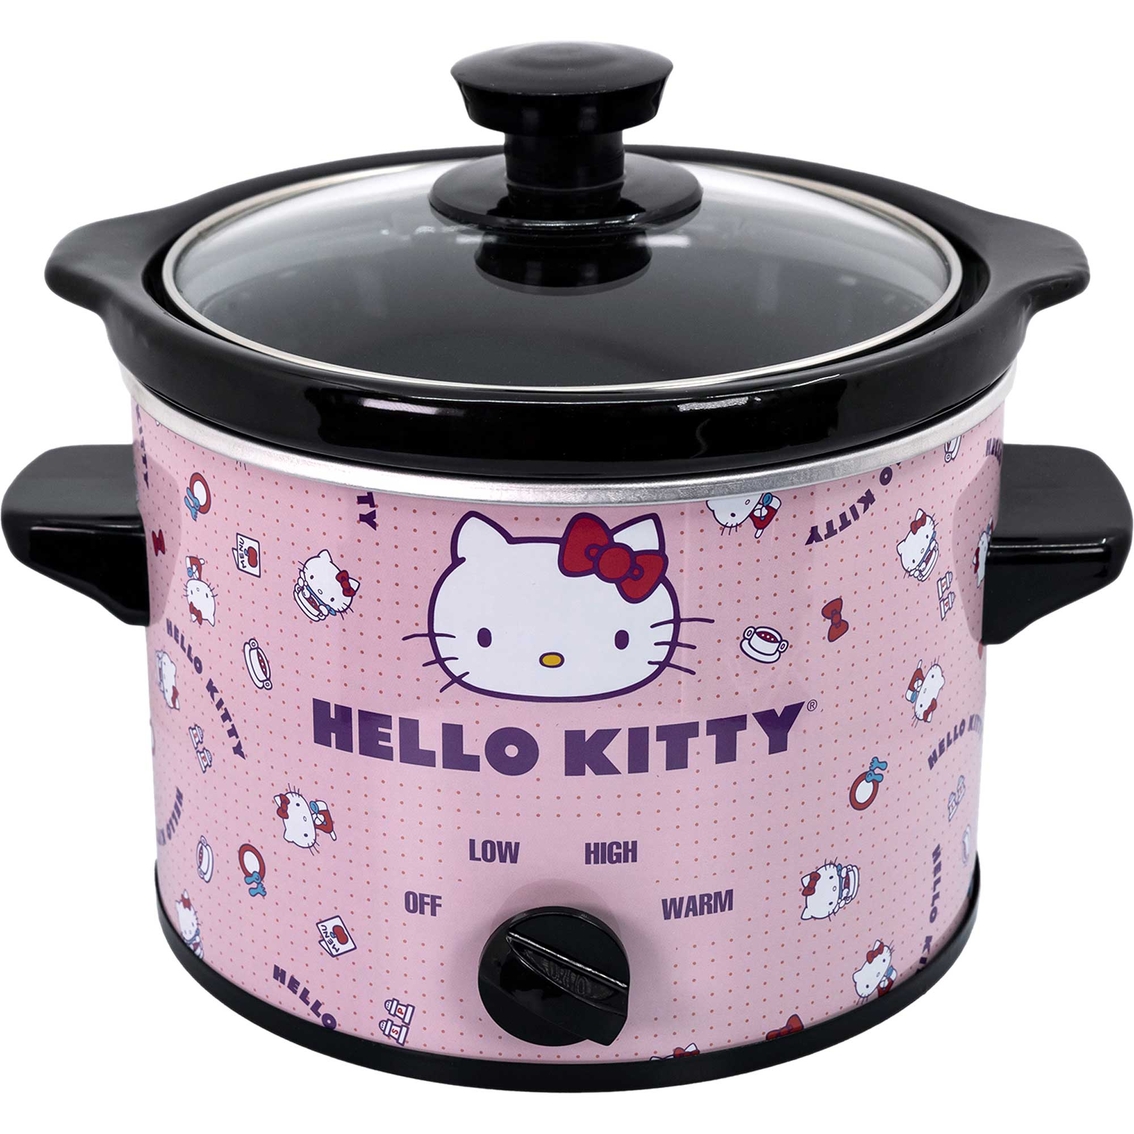 Hello Kitty 2 Quart Slow Cooker - Image 2 of 5